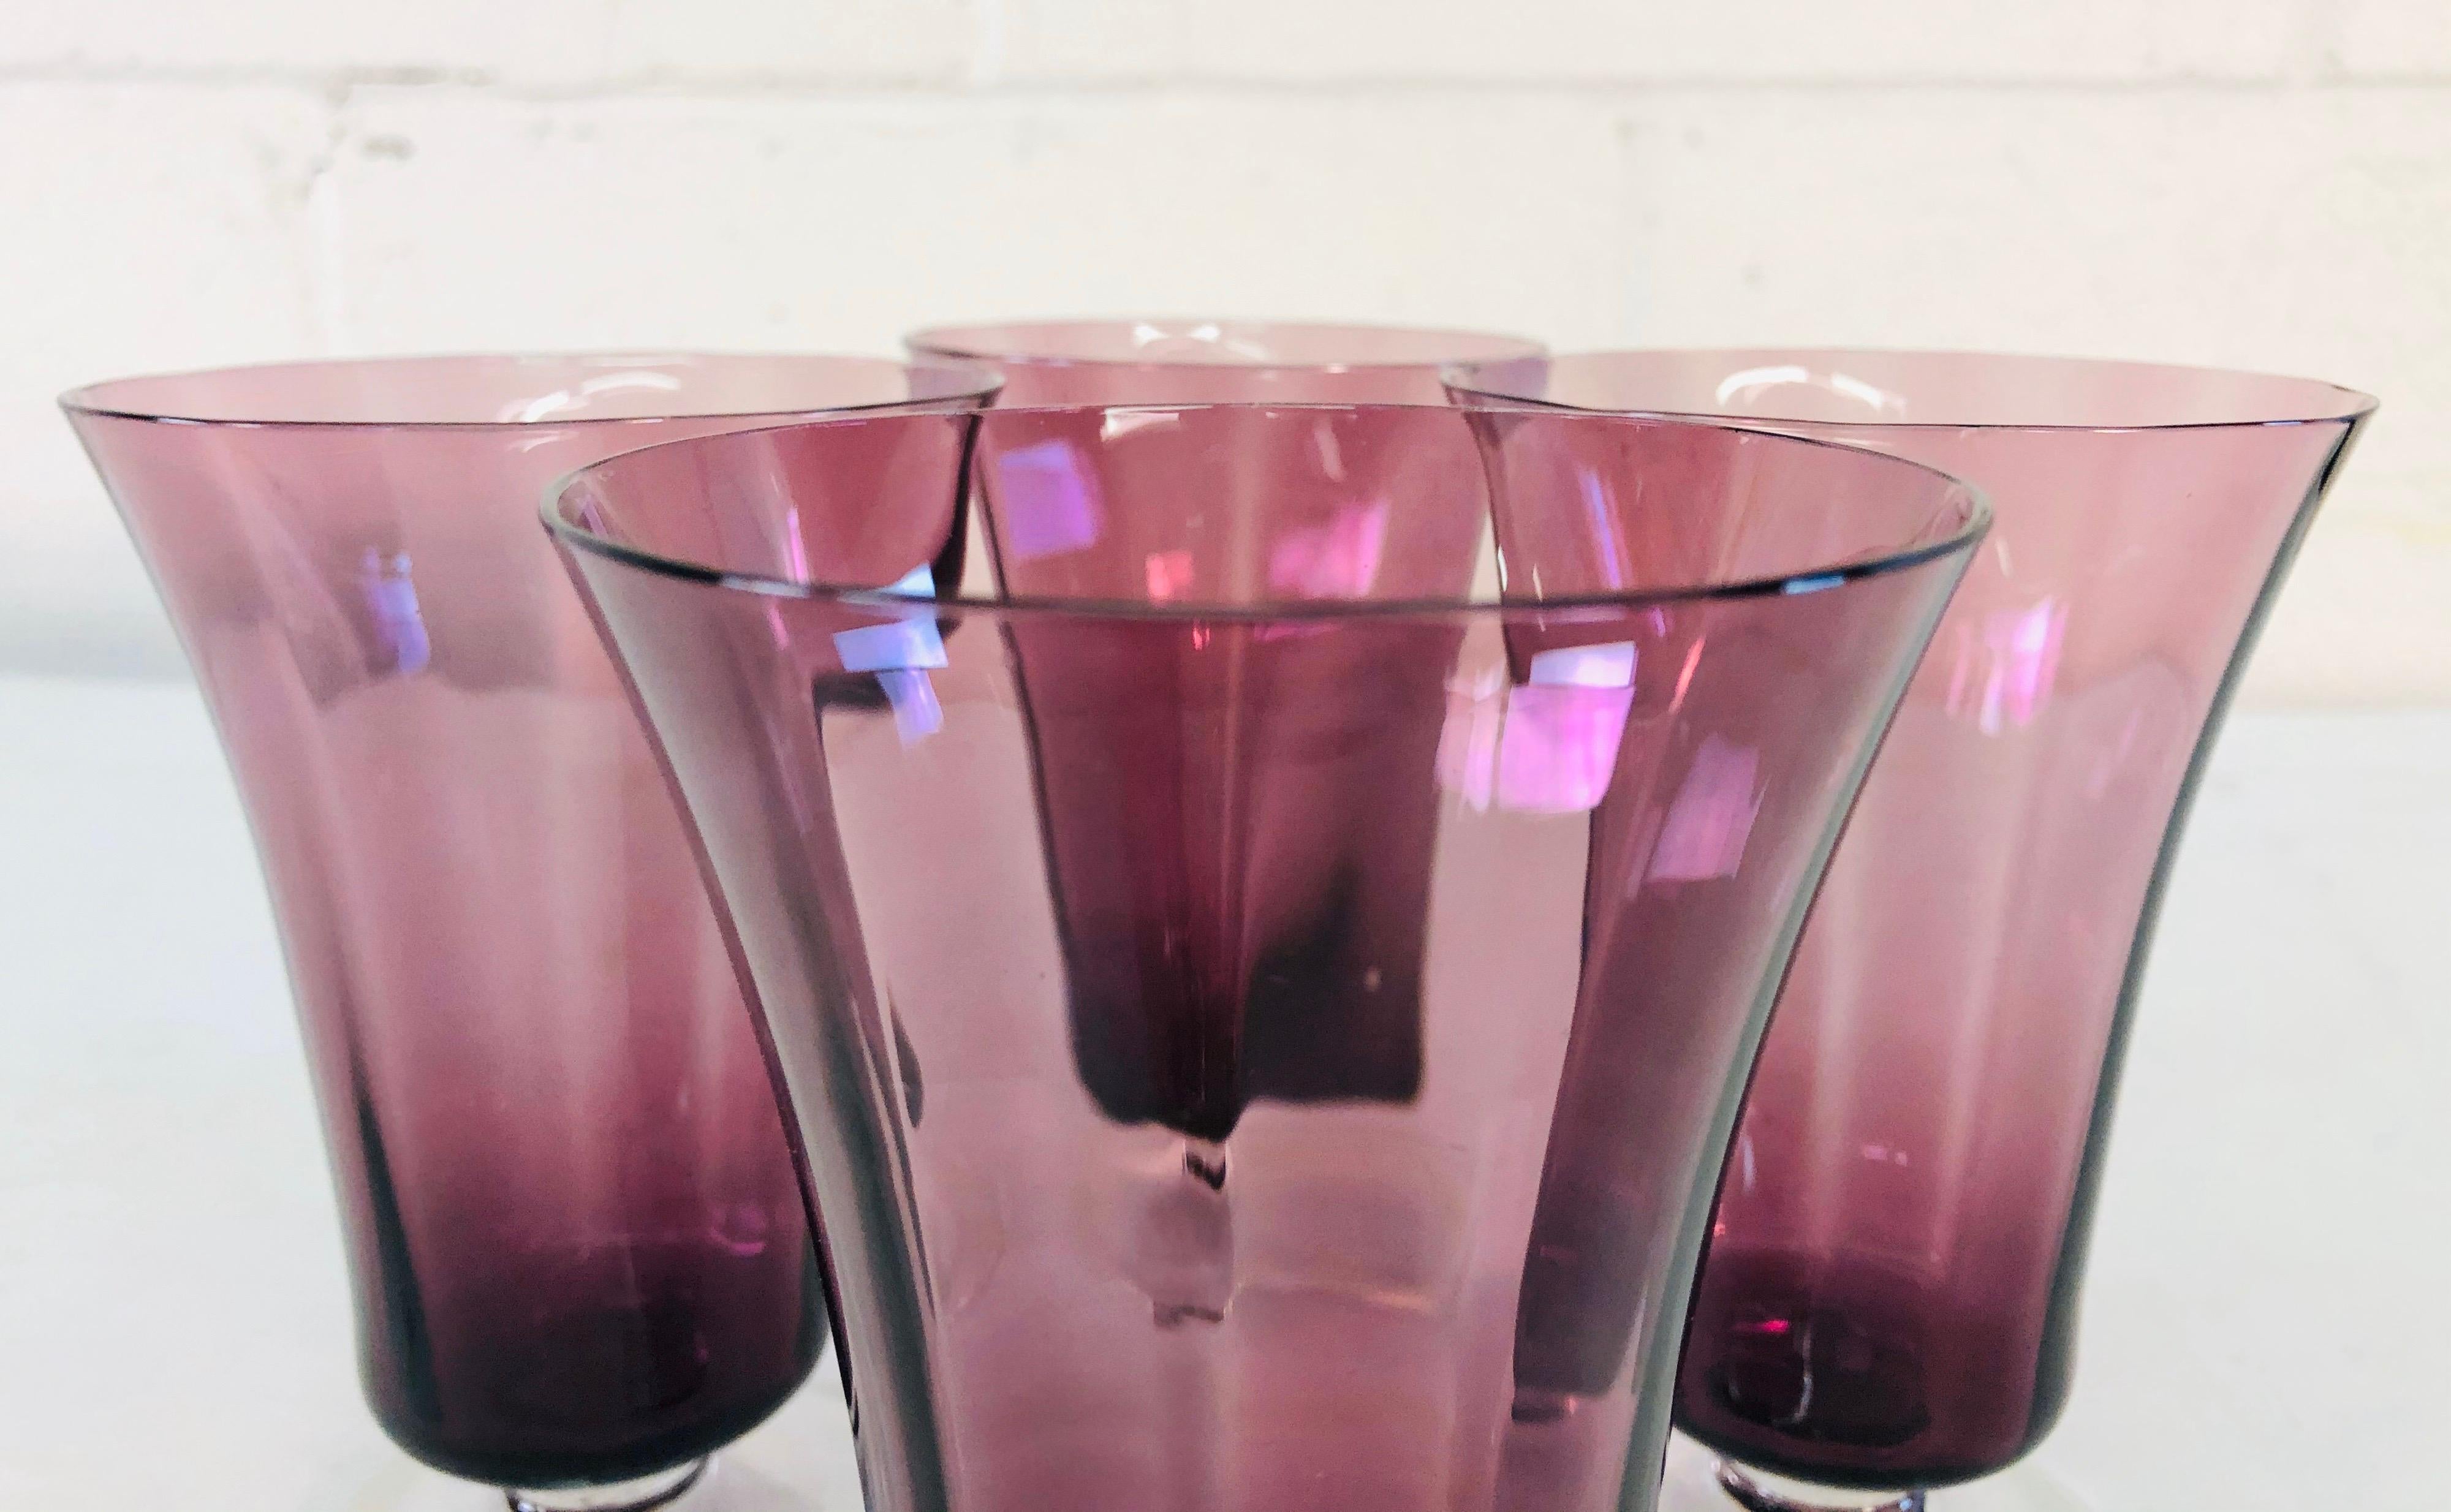 Vintage Art Deco style set of 4 amethyst glass stems with clear bases. The stems have a vertical rib accent. No marks.